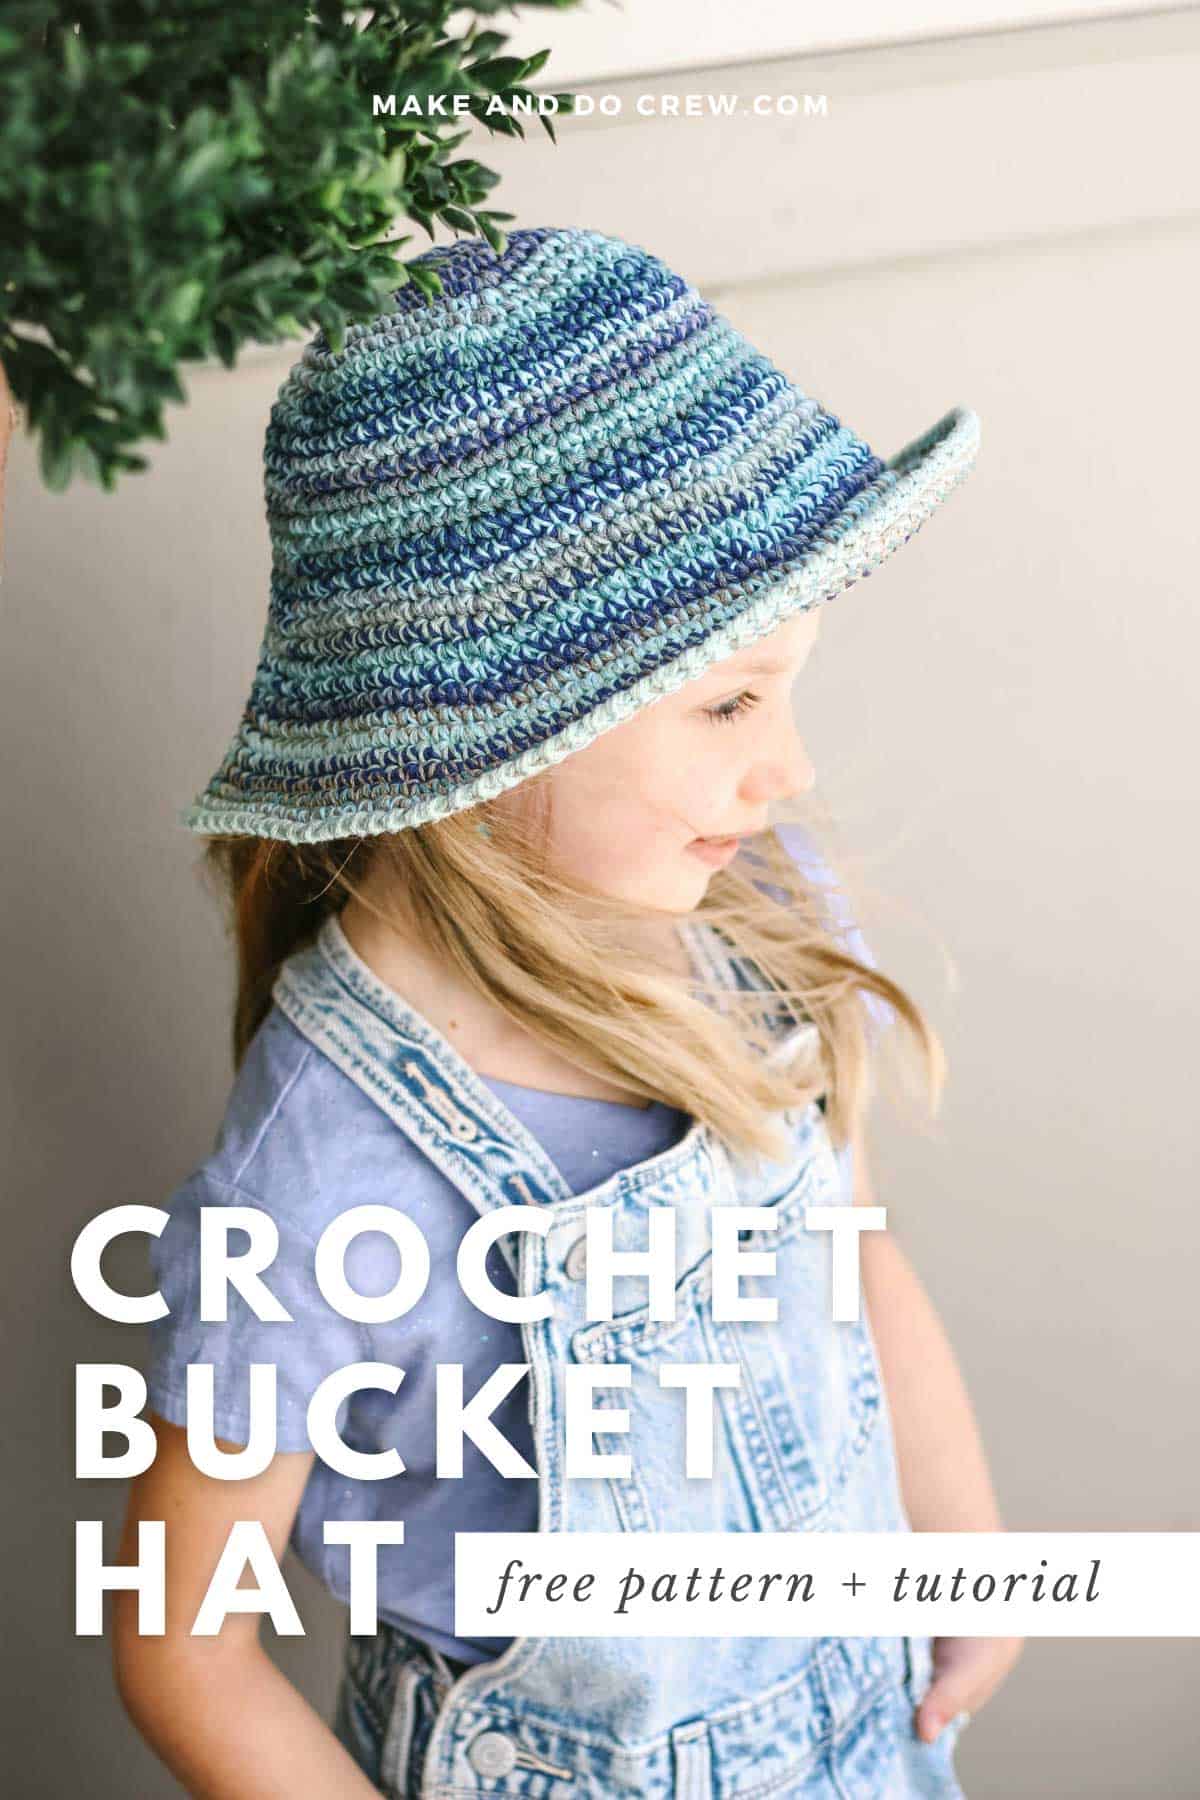 This image shows a photo of a girl wearing a blue crochet bucket hat. She has blonde hair and is looking away from the camera with her hands in her pockets.